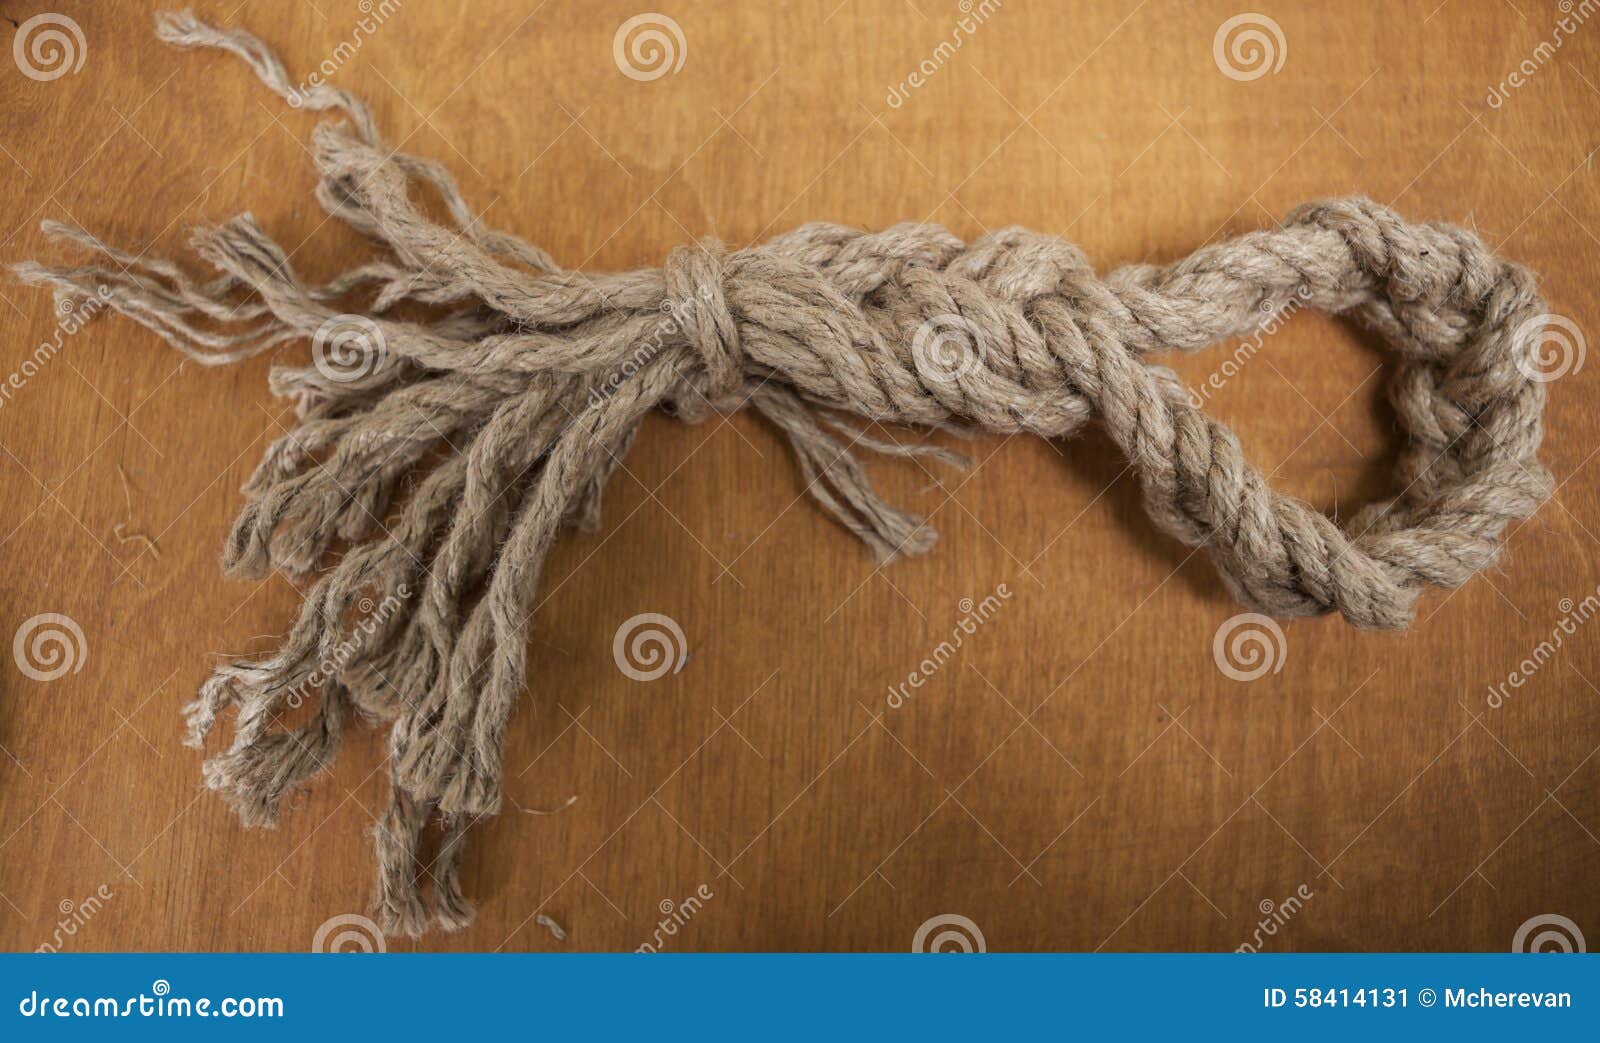 Beautiful Knot of a Strong Rope Stock Image - Image of ocean, sailing:  58414131